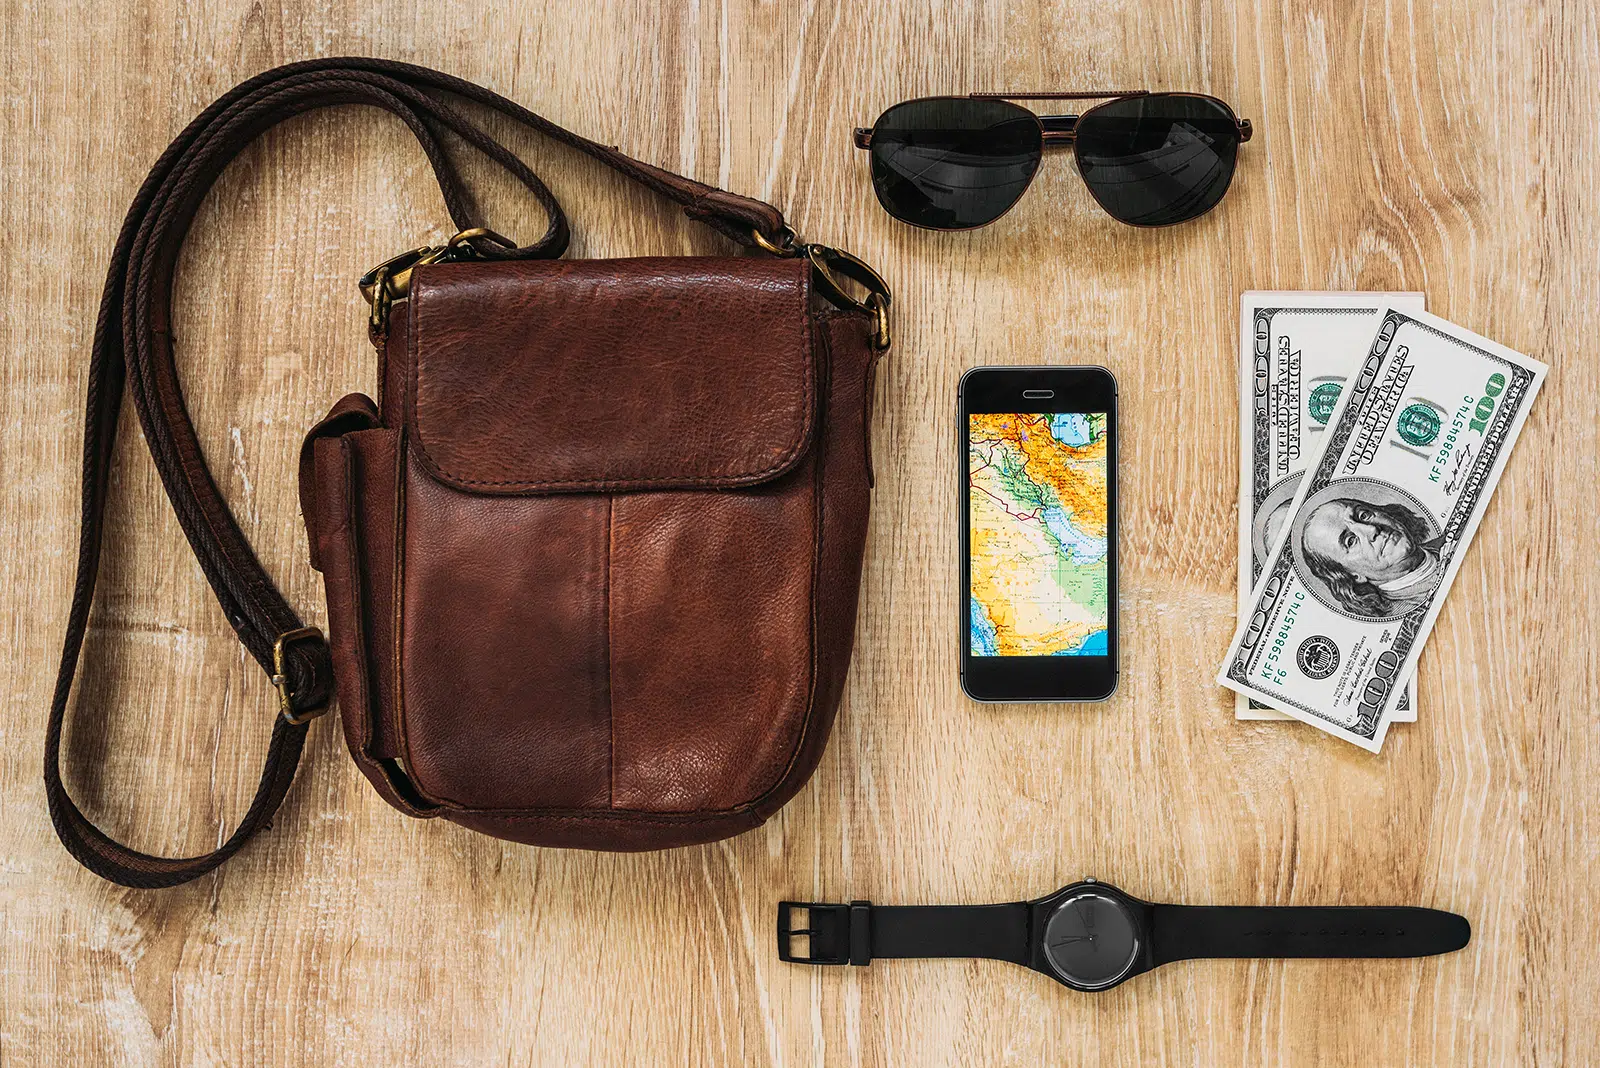 Leather bag, smartphone, sunglasses, watch, money on wooden background. Men's accessories